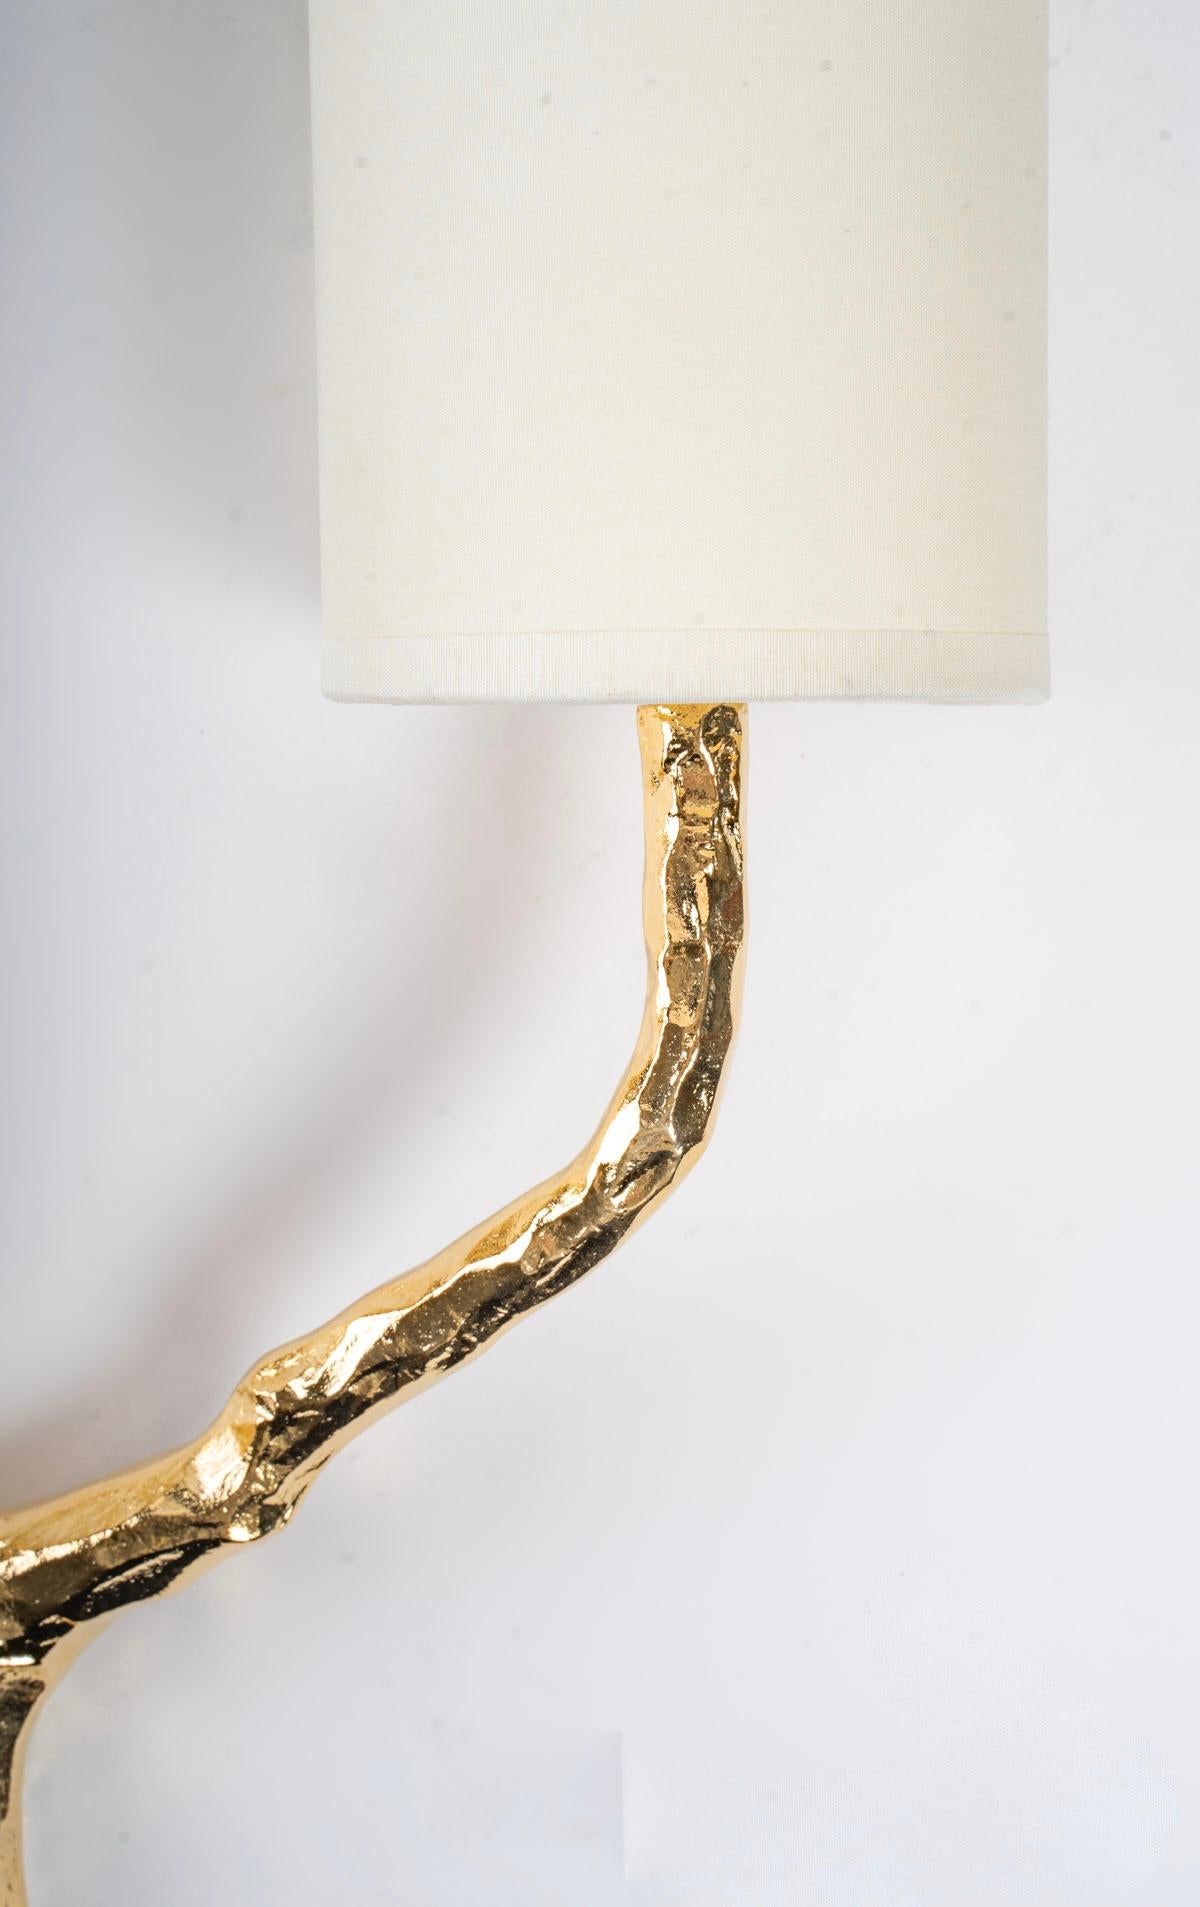 Elegant gilded bronze wall lights designed by Maison Arlus in the 1960s.
The two luminous arms in gilded bronze represent a stylized branch.
They are dressed
Cylindrical shades in ecru cotton resting on the branch.
2 bulbs per wall light.
 
 